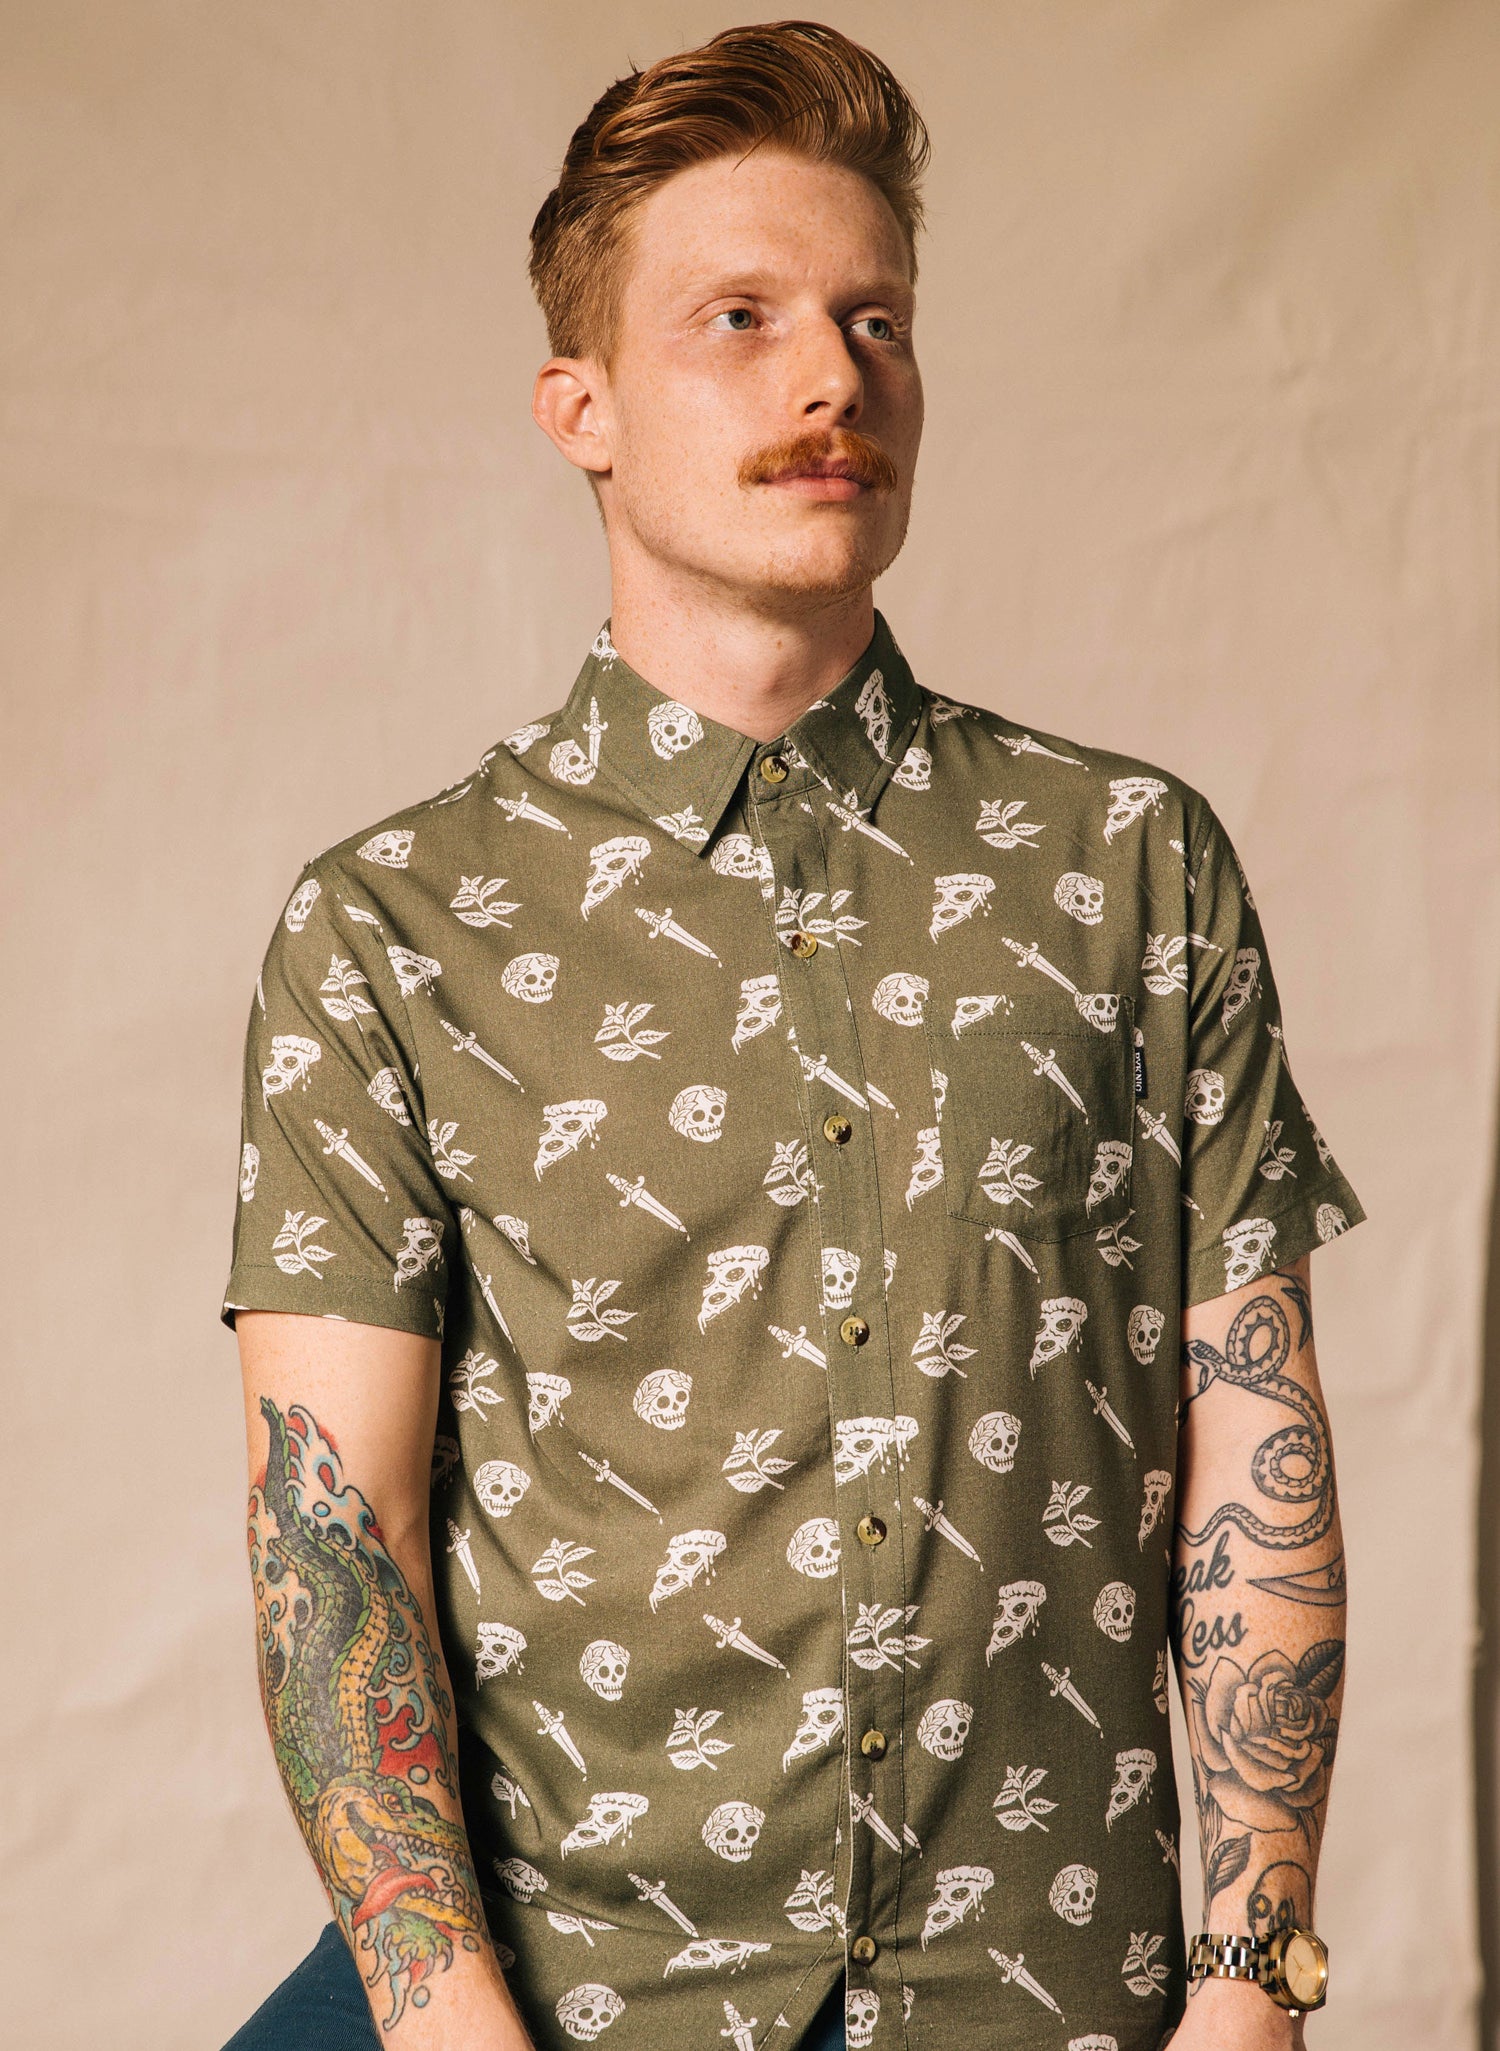 Pyknic | Pizza Slayer Vacation Casual Button-Up Shirt | Button Down Shirt with All Over Graphic Print, Pizzeria Food Shirt, Cool Food Shirt, Best Foodie Shirt, Best Foodie Gift, Food Themed Apparel, Food Tattoo Flash, Pizza Pattern Button Down Shirt, Dagger Tattoo, Cool Button Up Shirts